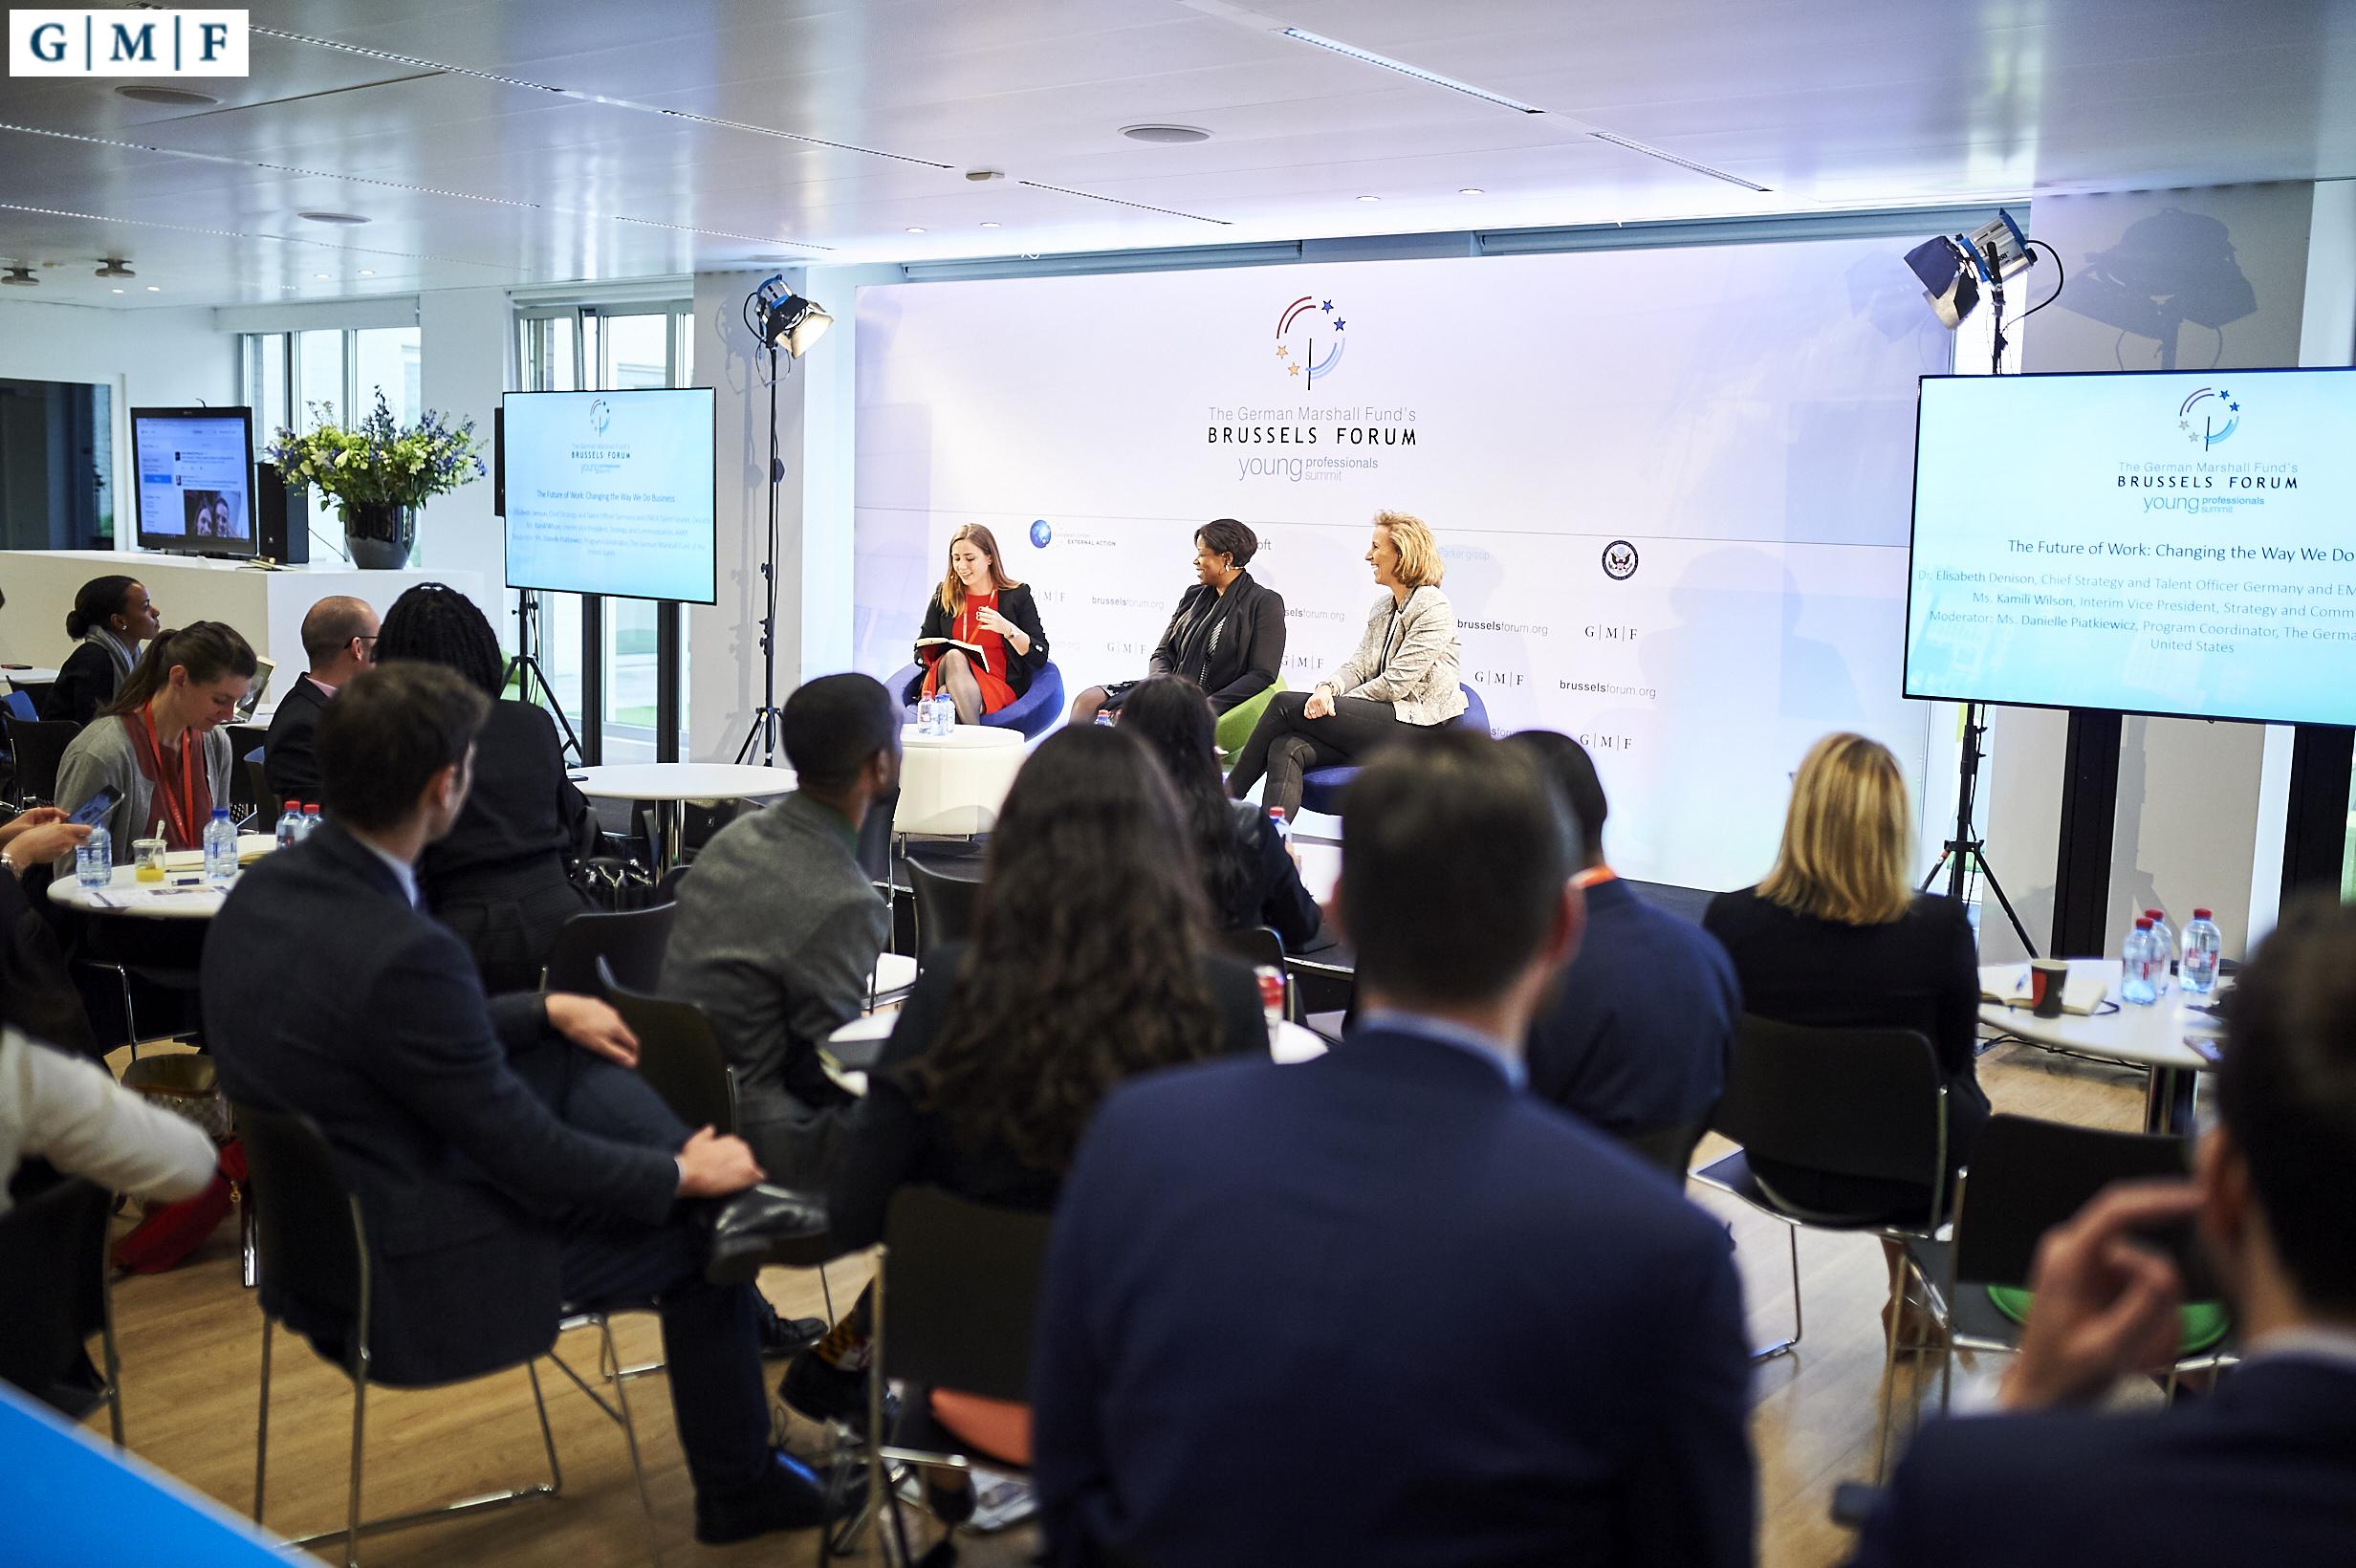 GMF's Brussels Forum The Next Generation of Leaders Responds